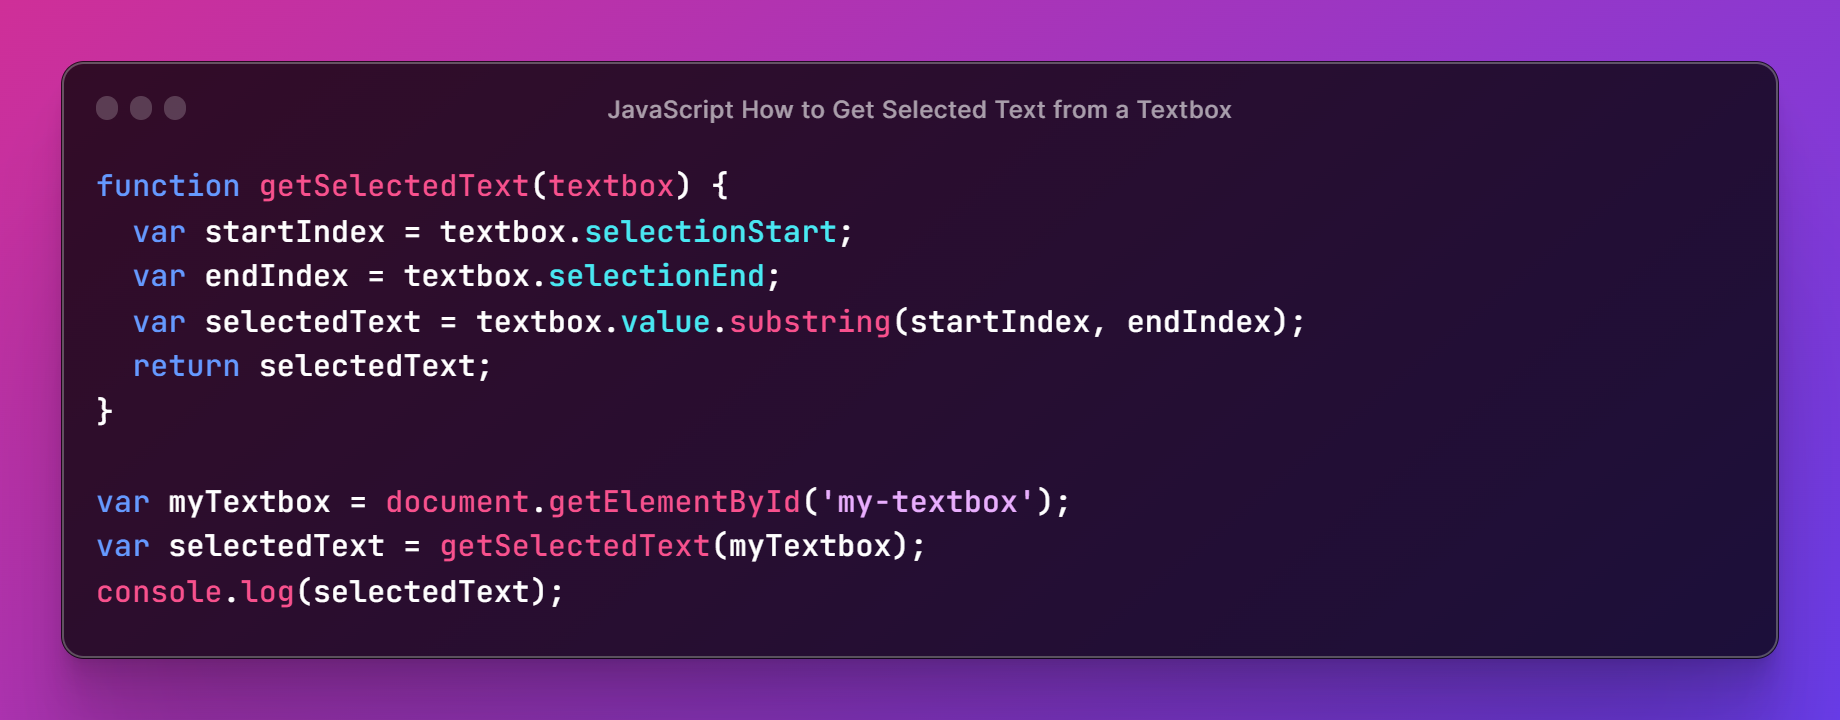 How-to-Get-Selected-Text-from-a-Textbox-using-JavaScript 